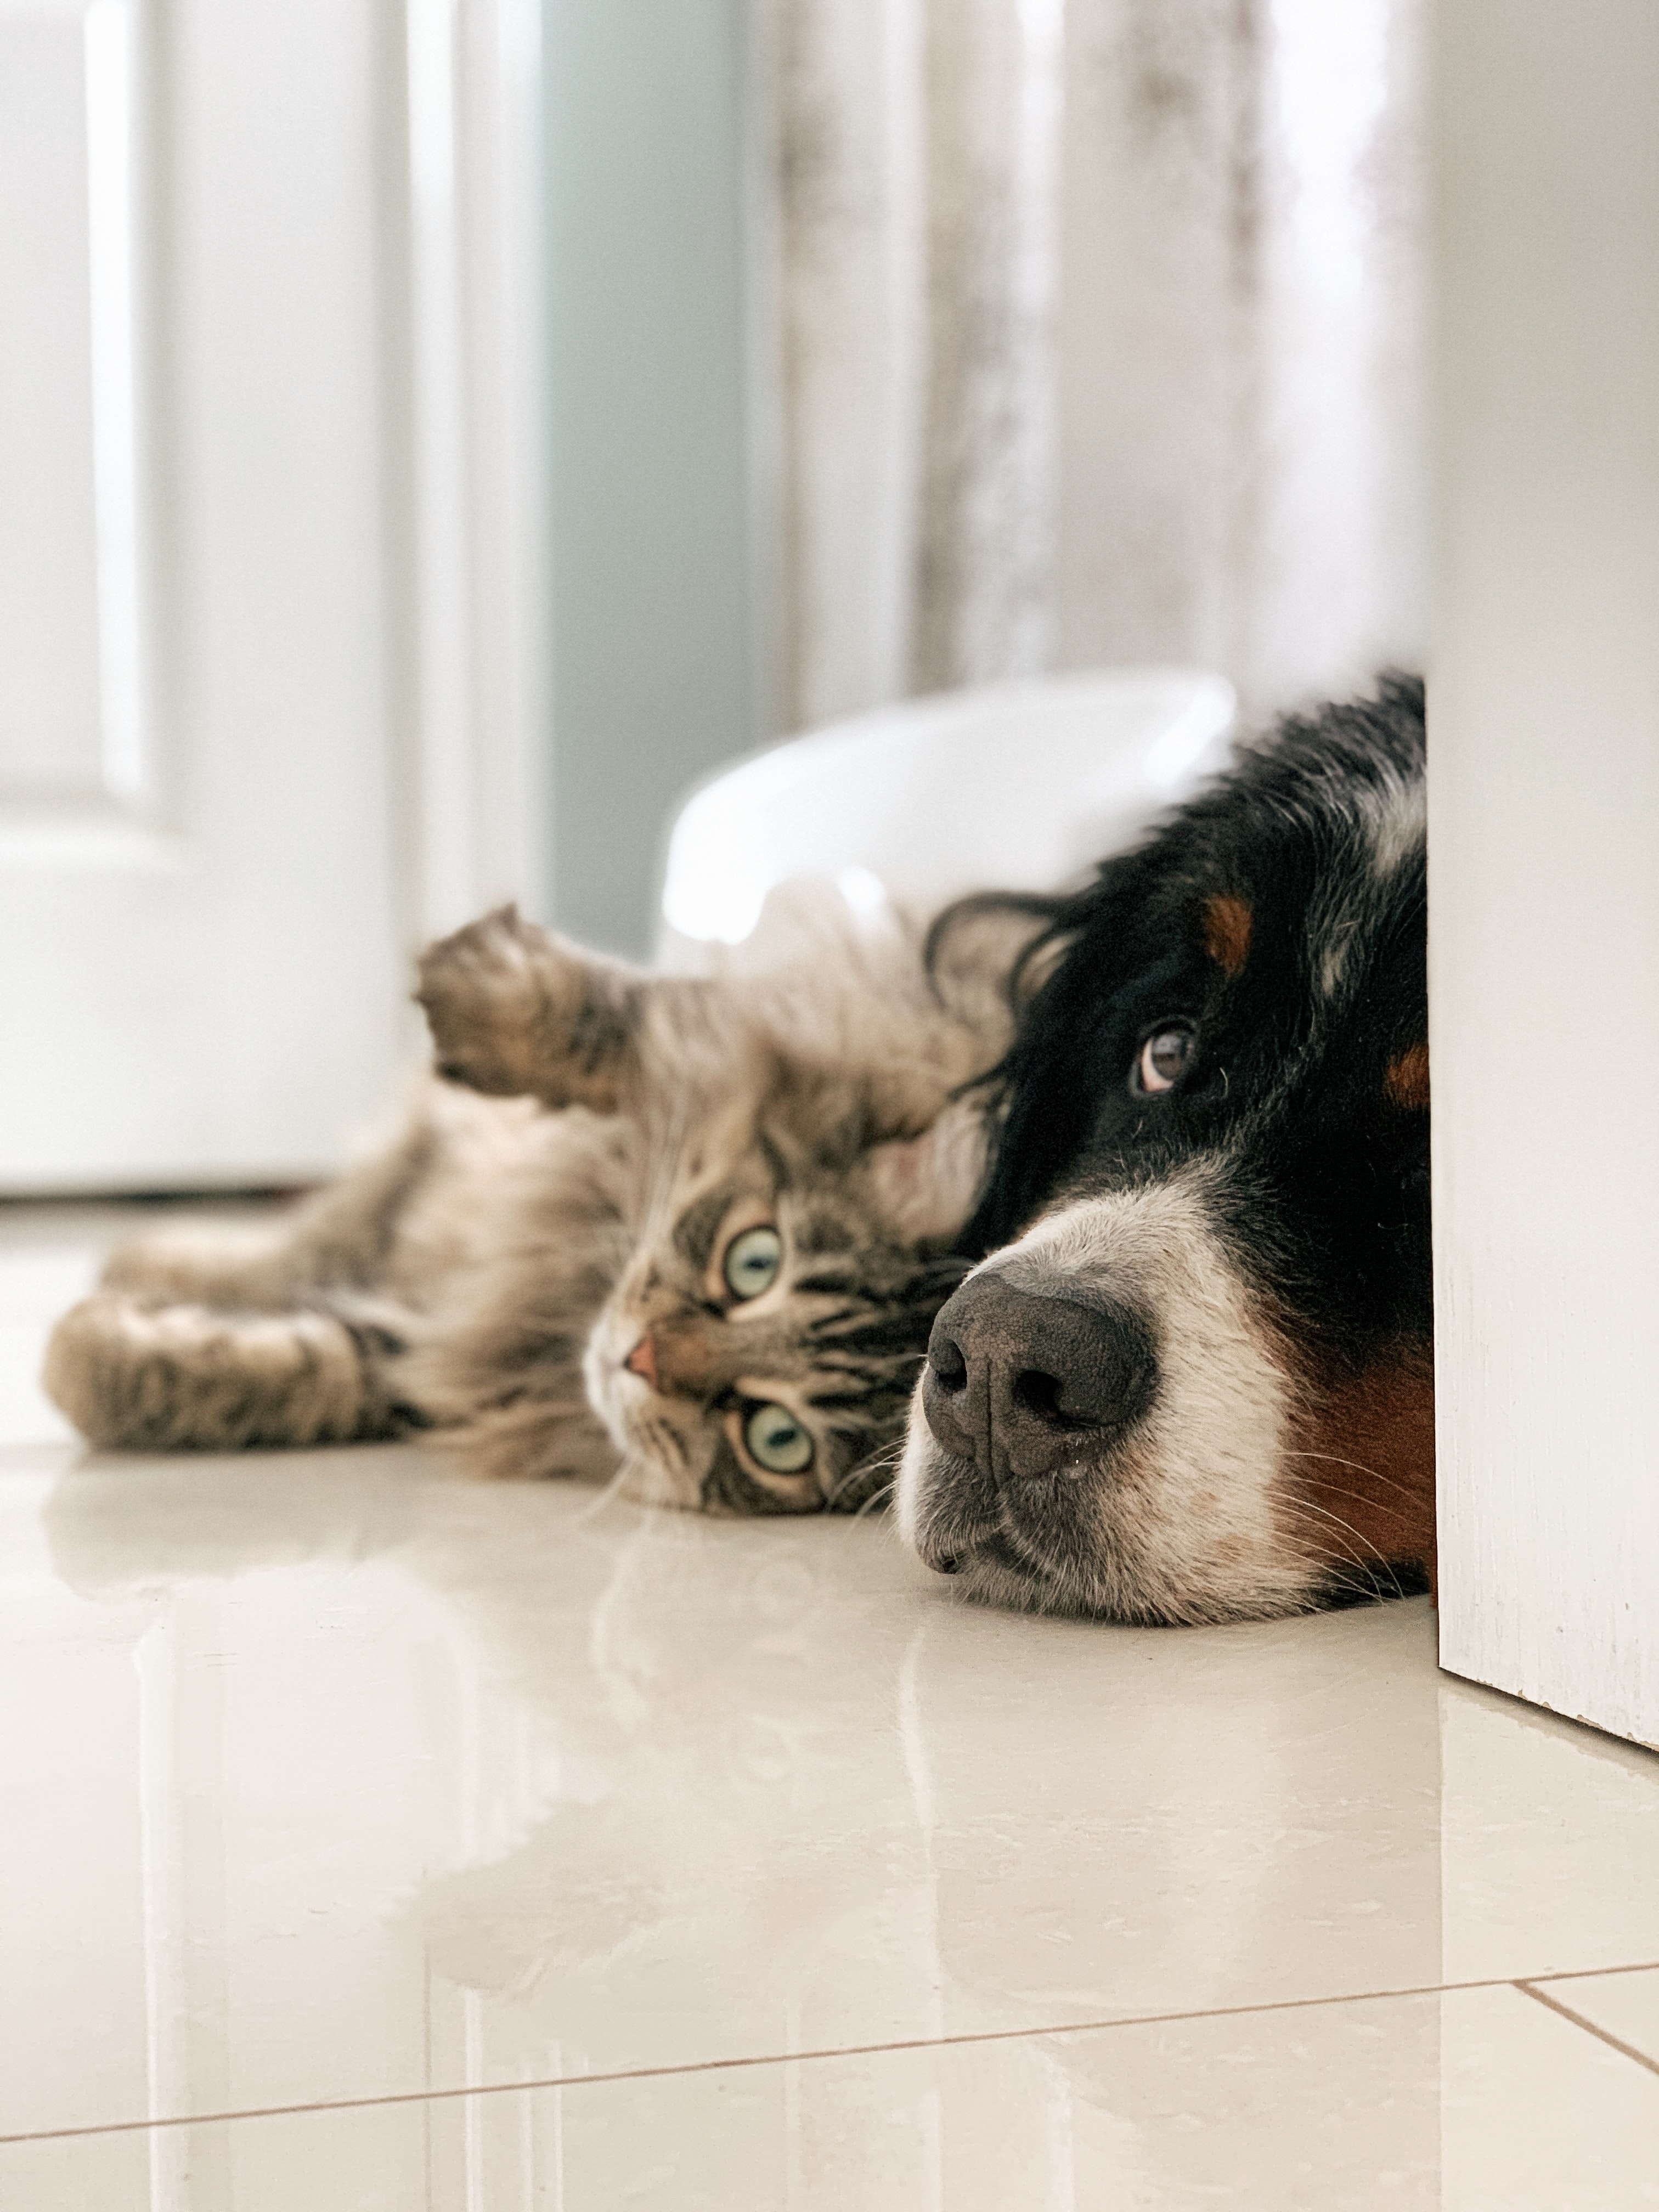 A picture of a dog and cat on a lying close to each other on the floor.